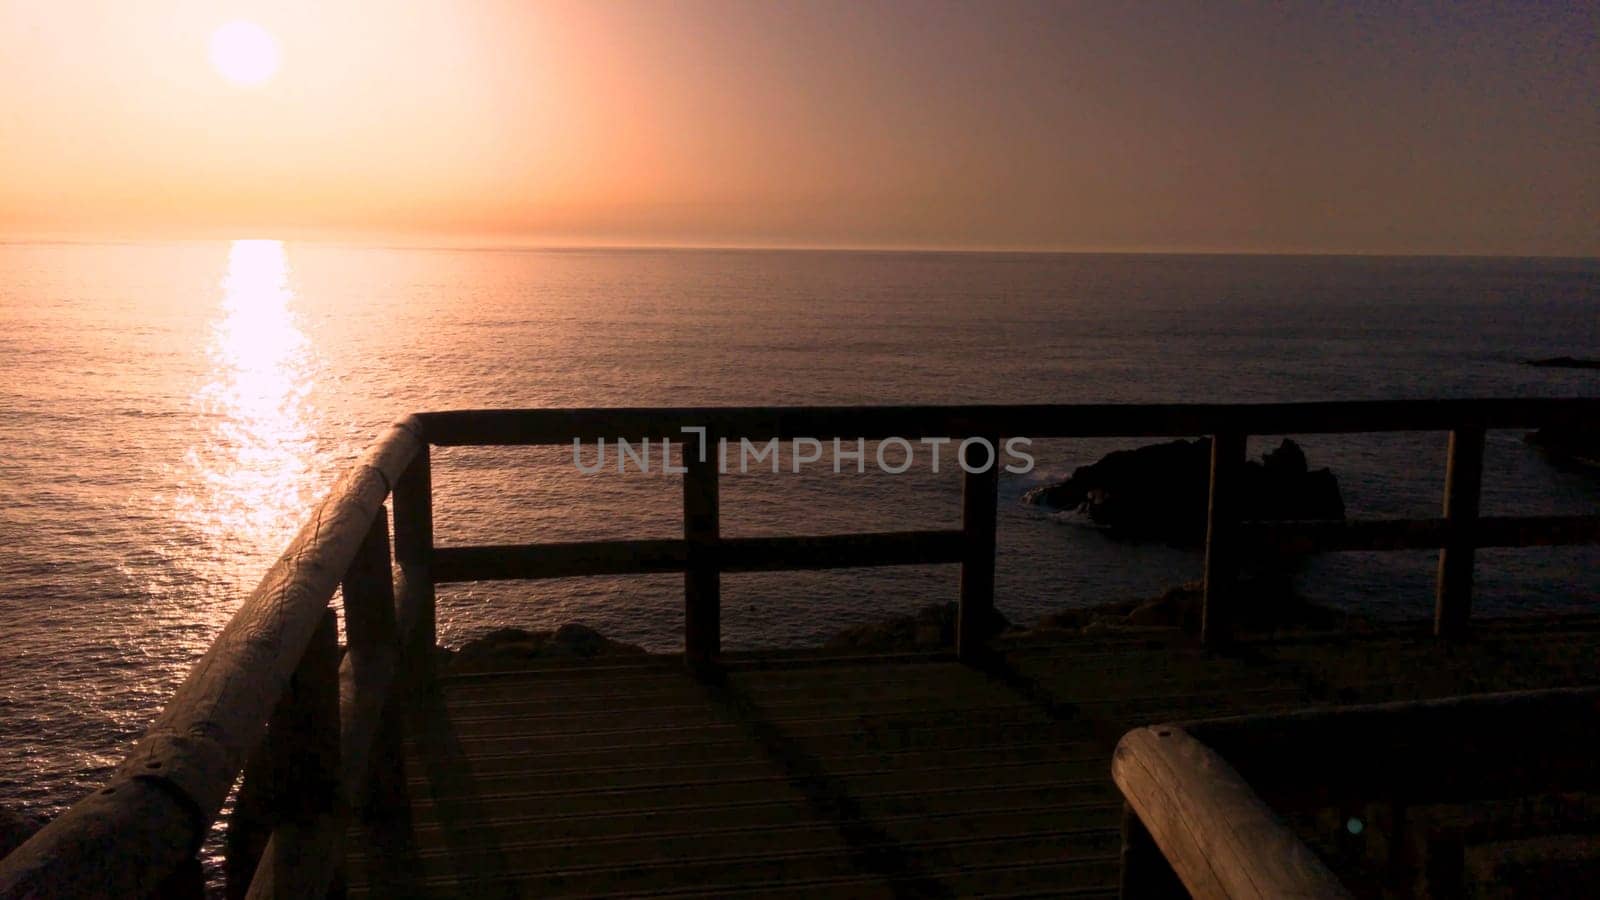 Sunset view from the wooden walkway on Carrapateira, District Aljezur, Algarve Portugal